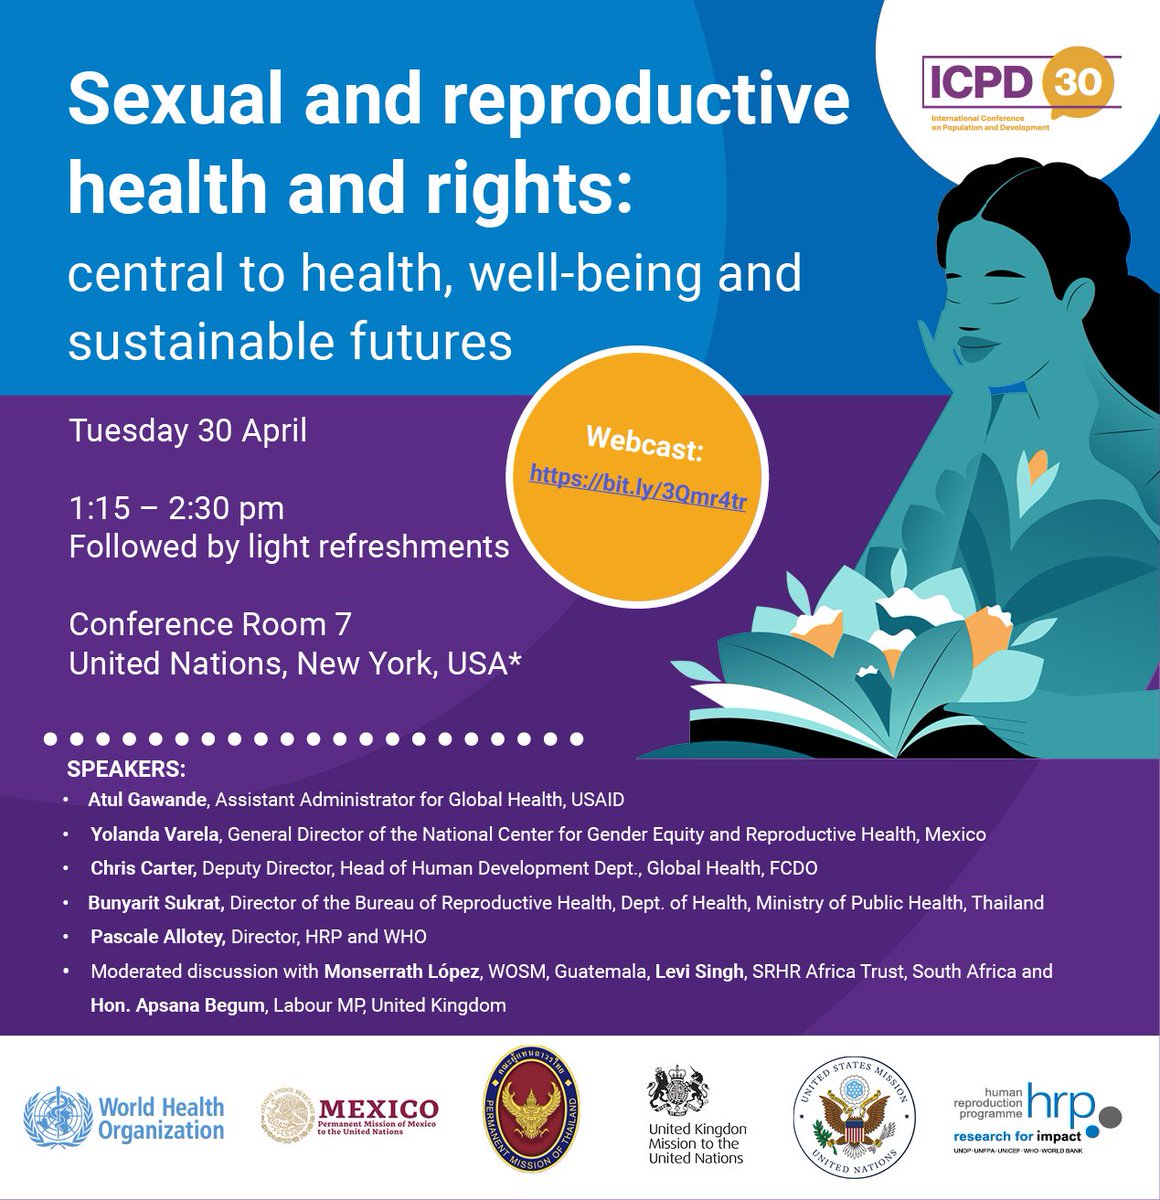 Join us 30 April at 1:15 PM EDT, UN, NYC for #ICPD30. Sexual and reproductive health and rights: central to health, well-being and sustainable futures Webcast available: bit.ly/3Qmr4tr Speaker list below👇